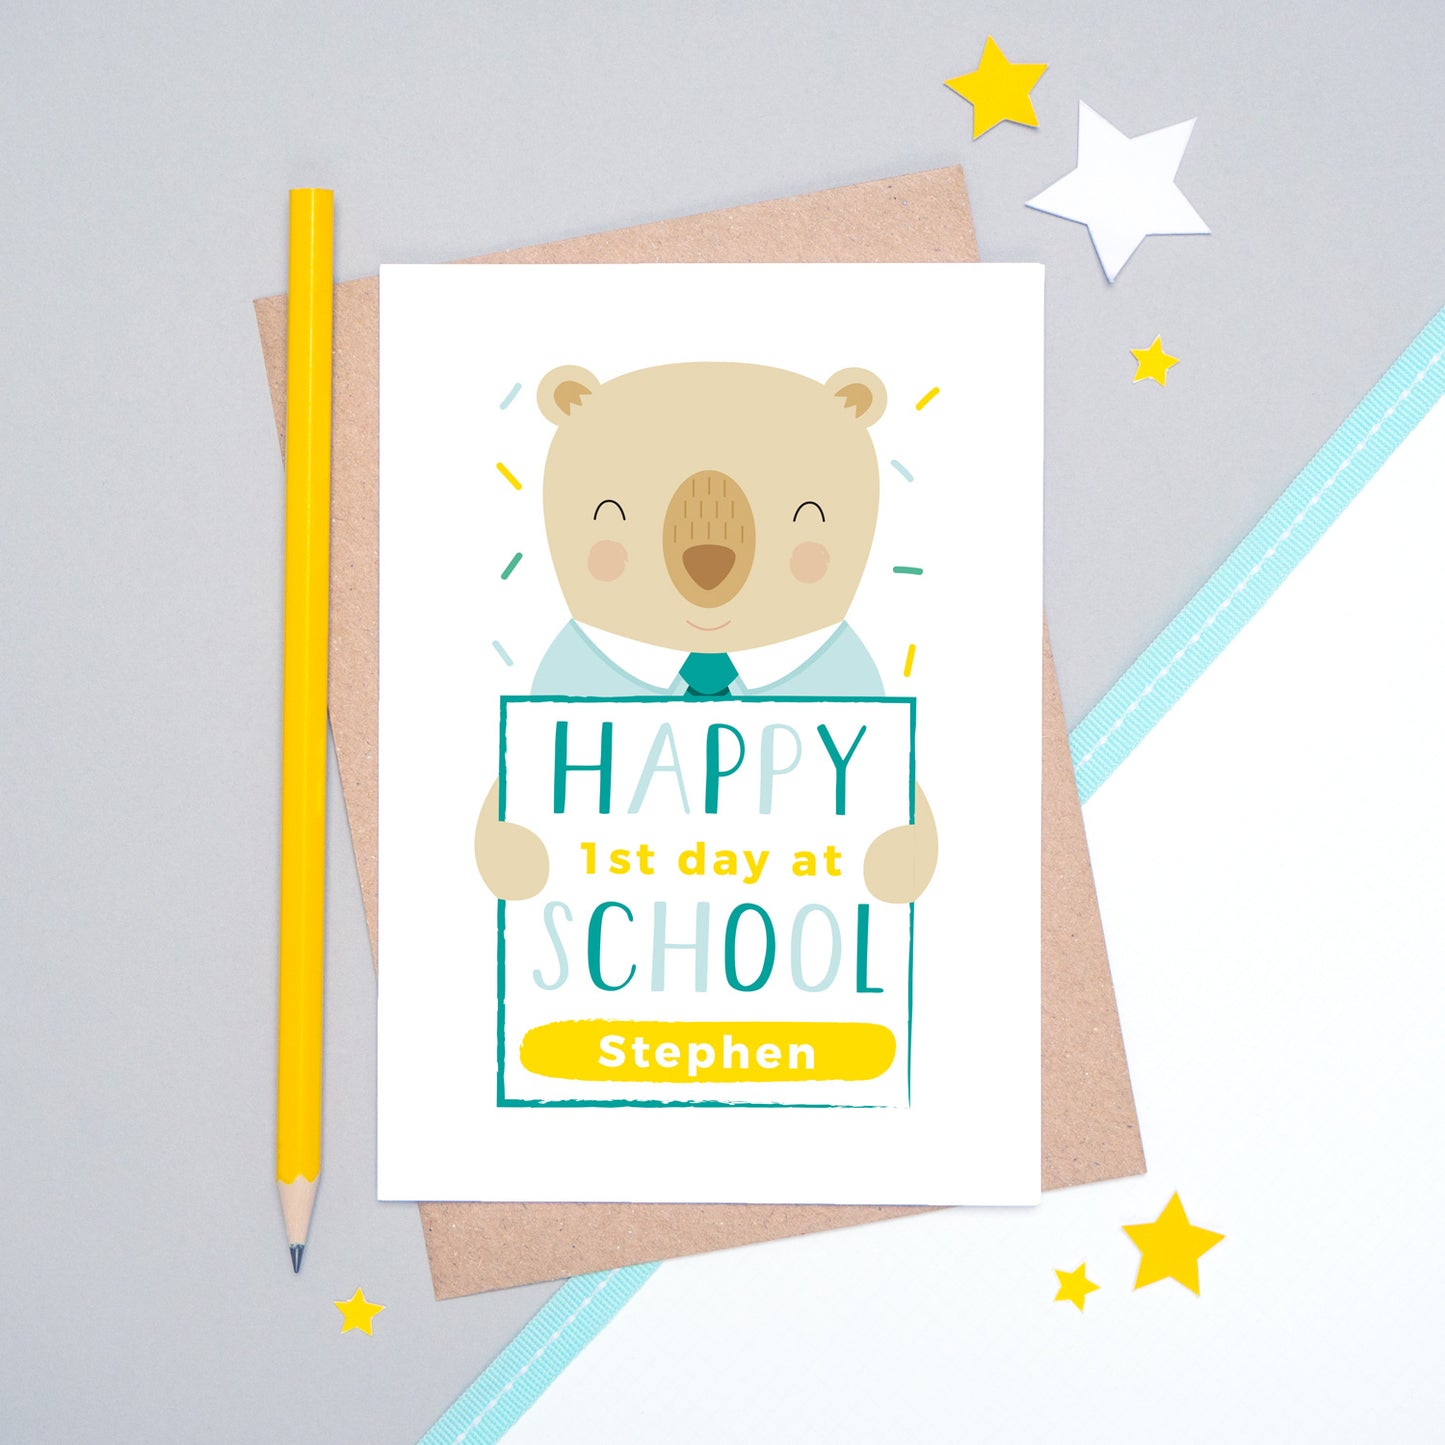 A happy 1st day at school personalised card featuring a friendly bear sat on a grey and white background.